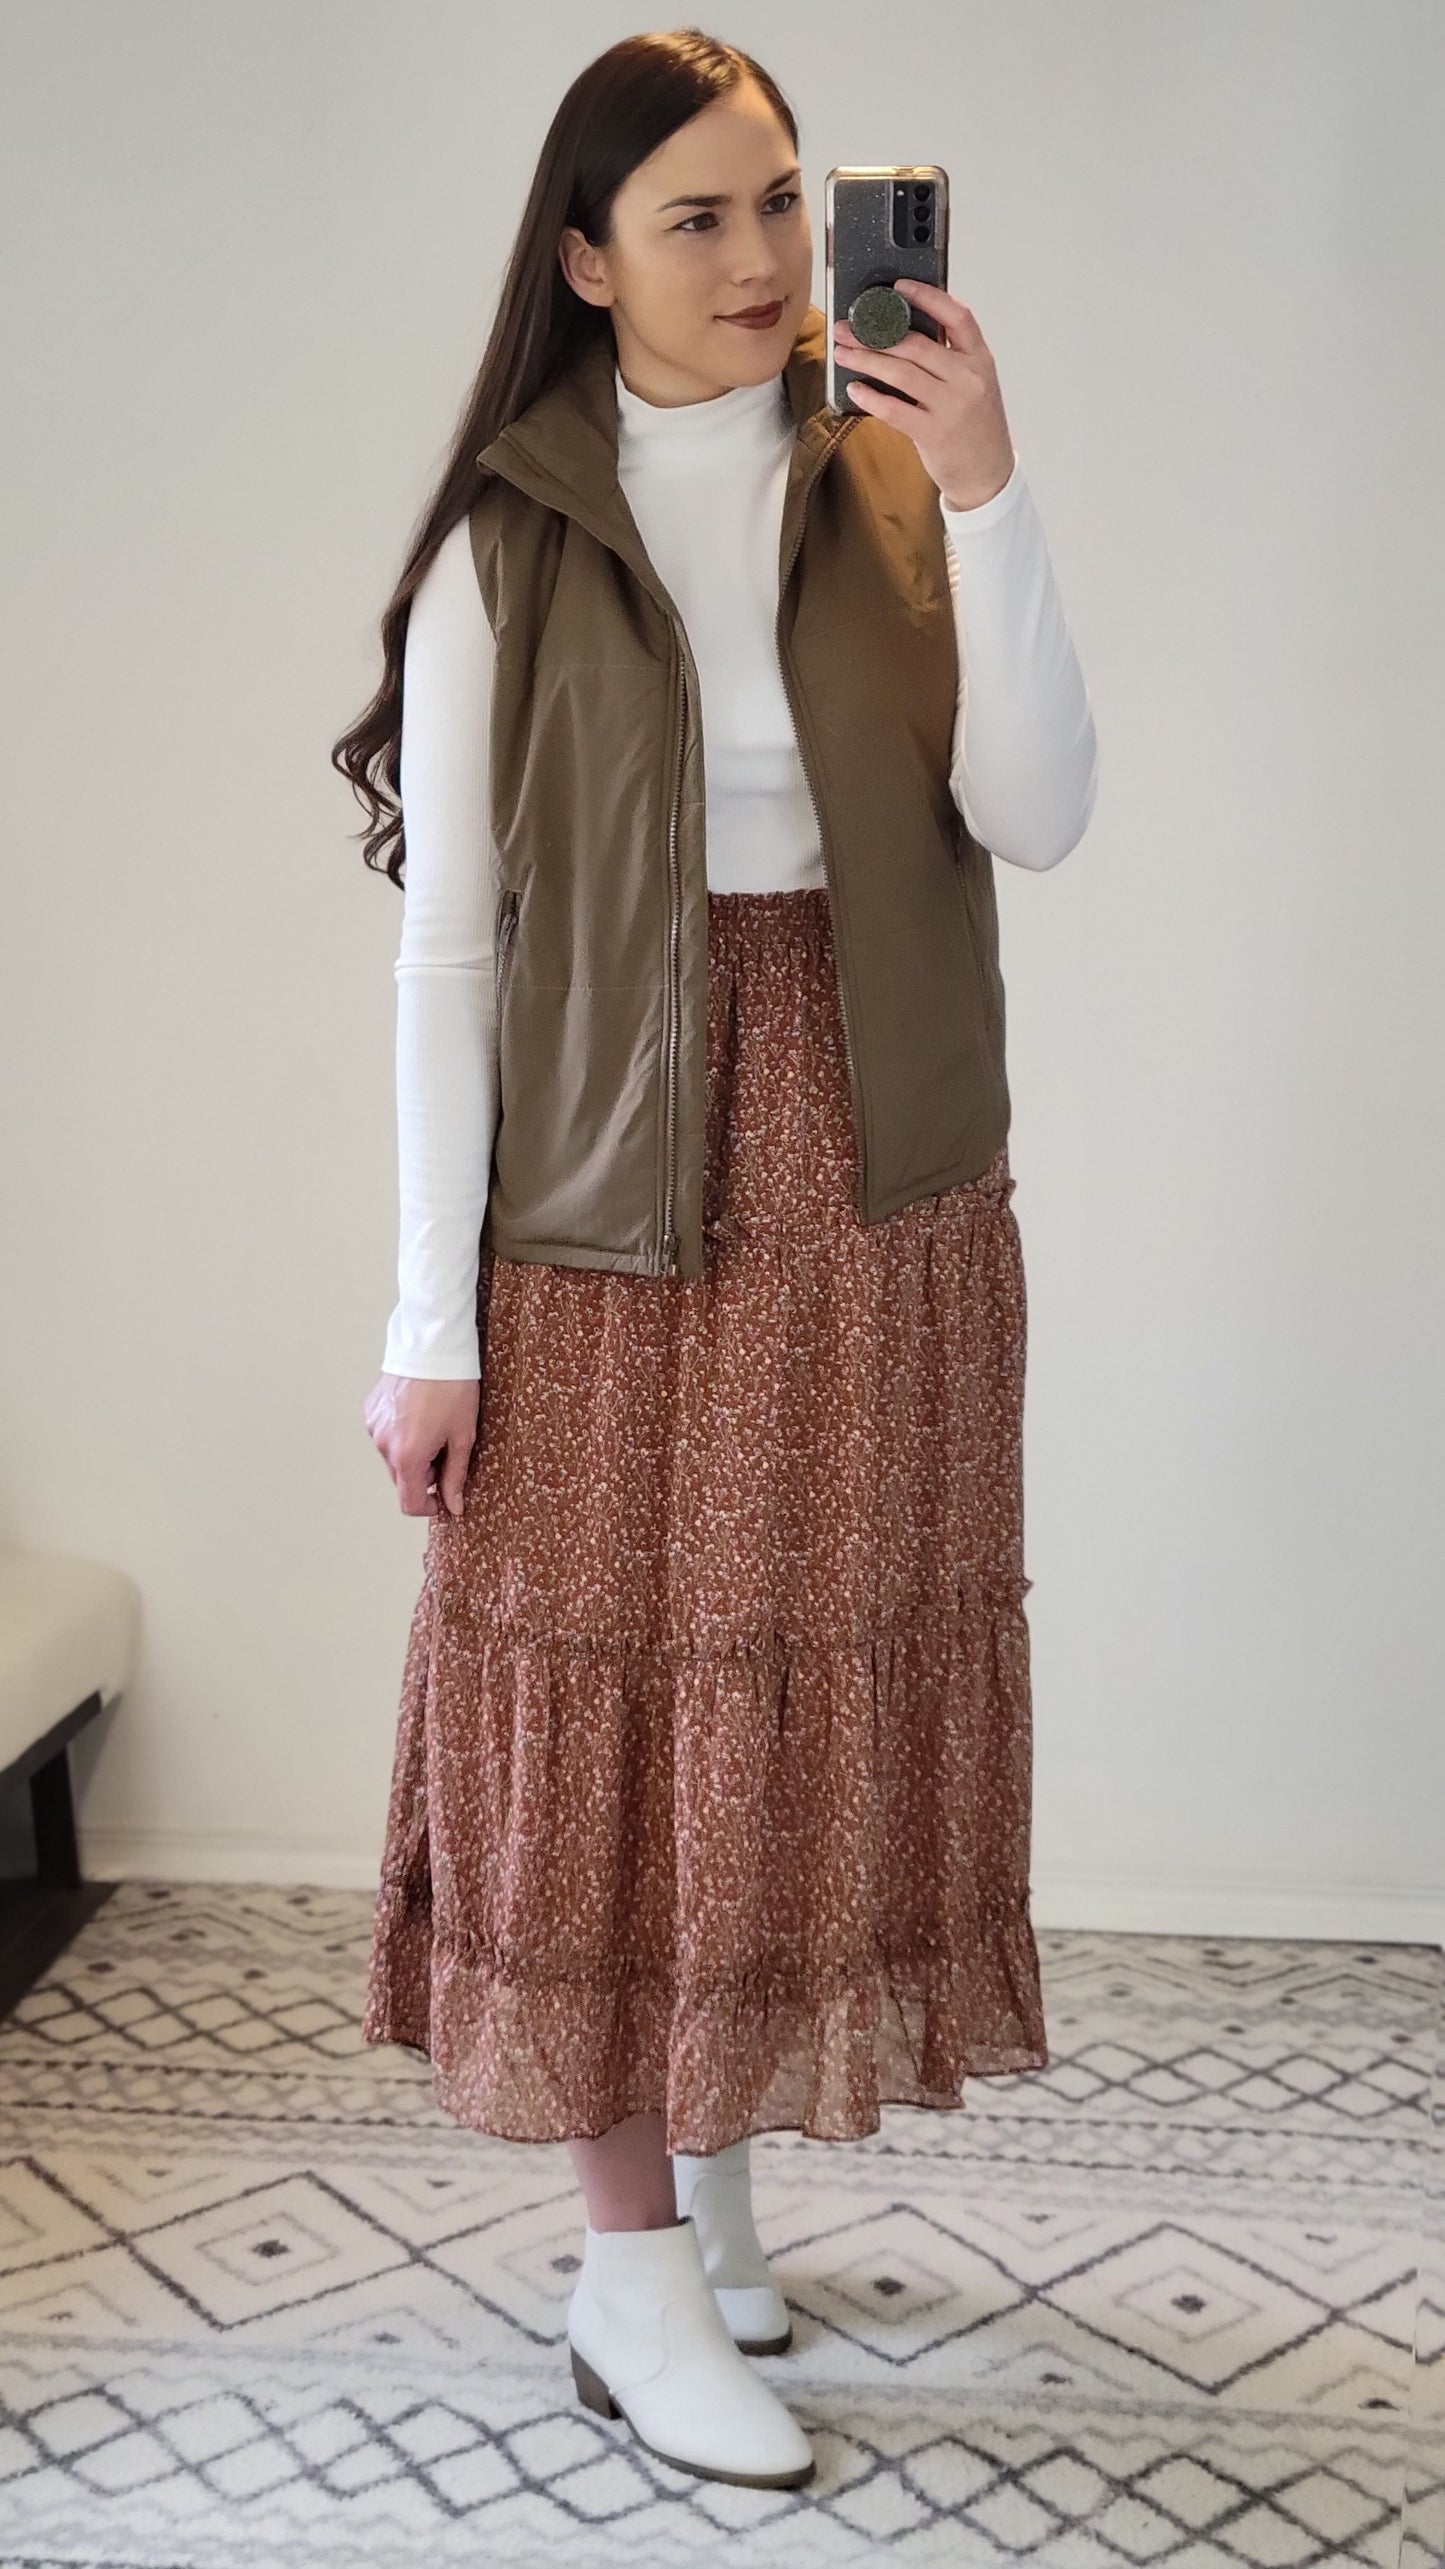 Mocha Quilt Vest with Pockets "Laurie"